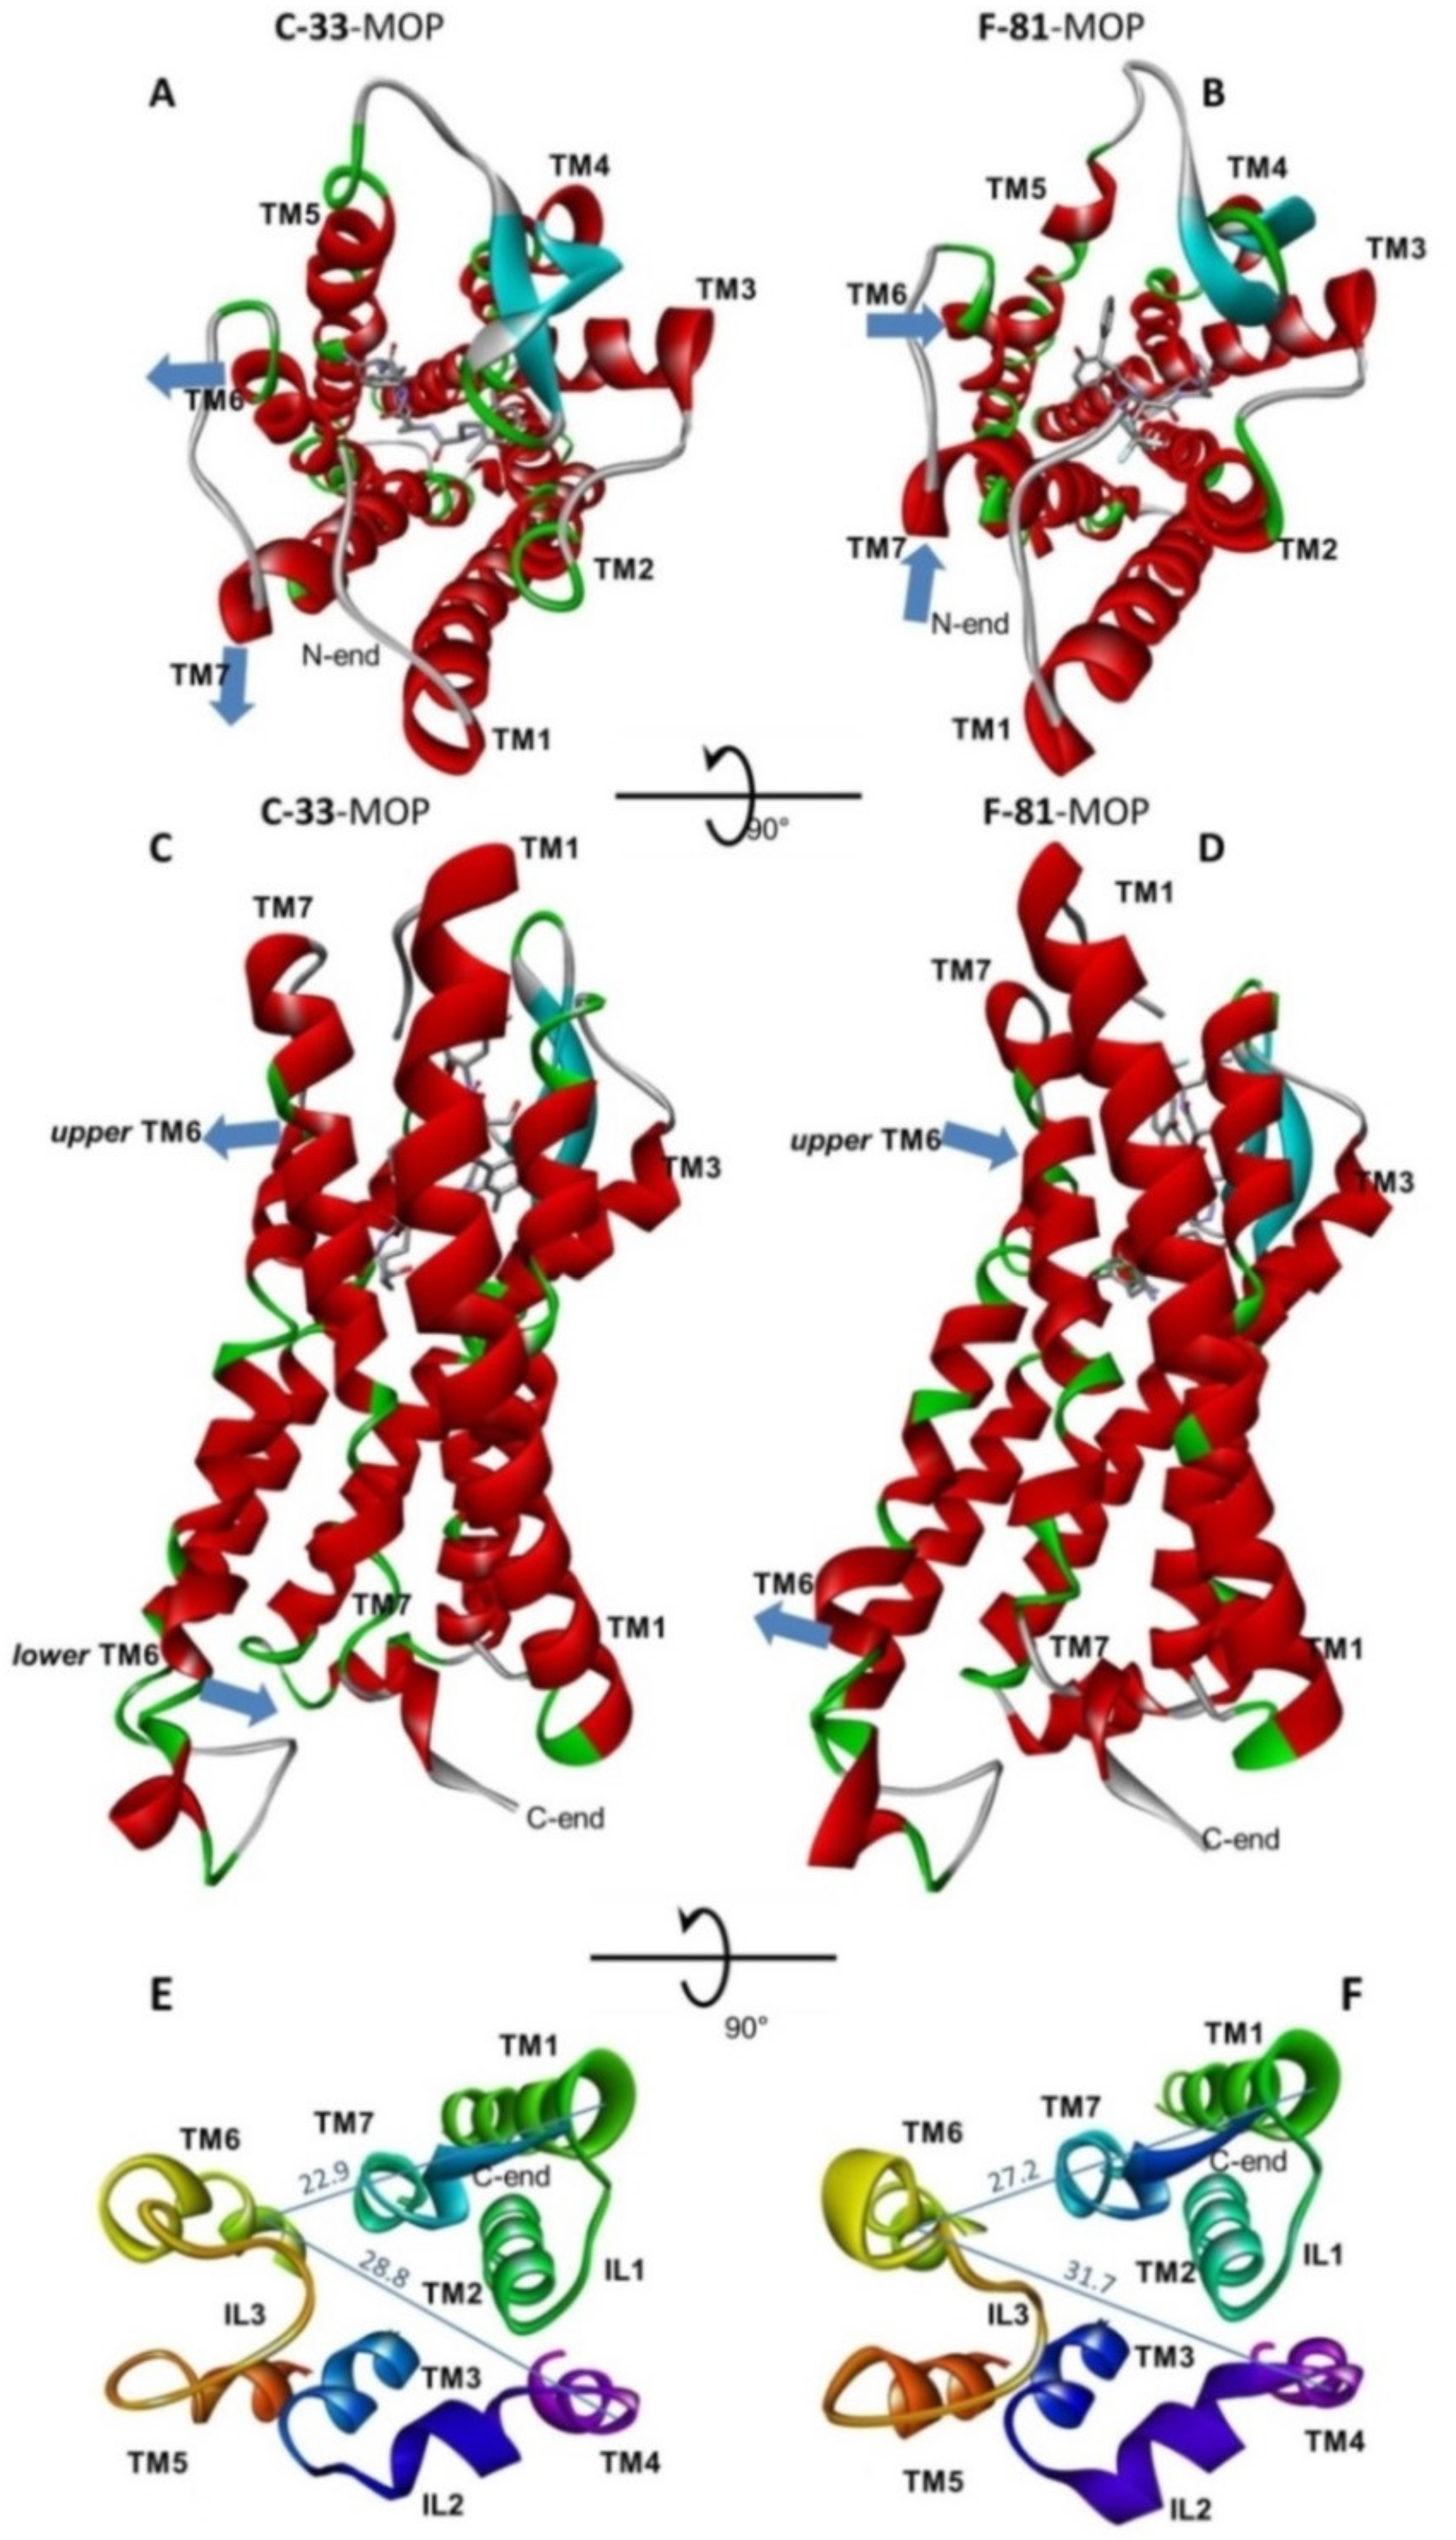 Molecules Free Full Text Pharmacological Characterization Of µ Opioid Receptor Agonists With Biased G Protein Or B Arrestin Signaling And Computational Study Of Conformational Changes During Receptor Activation Html